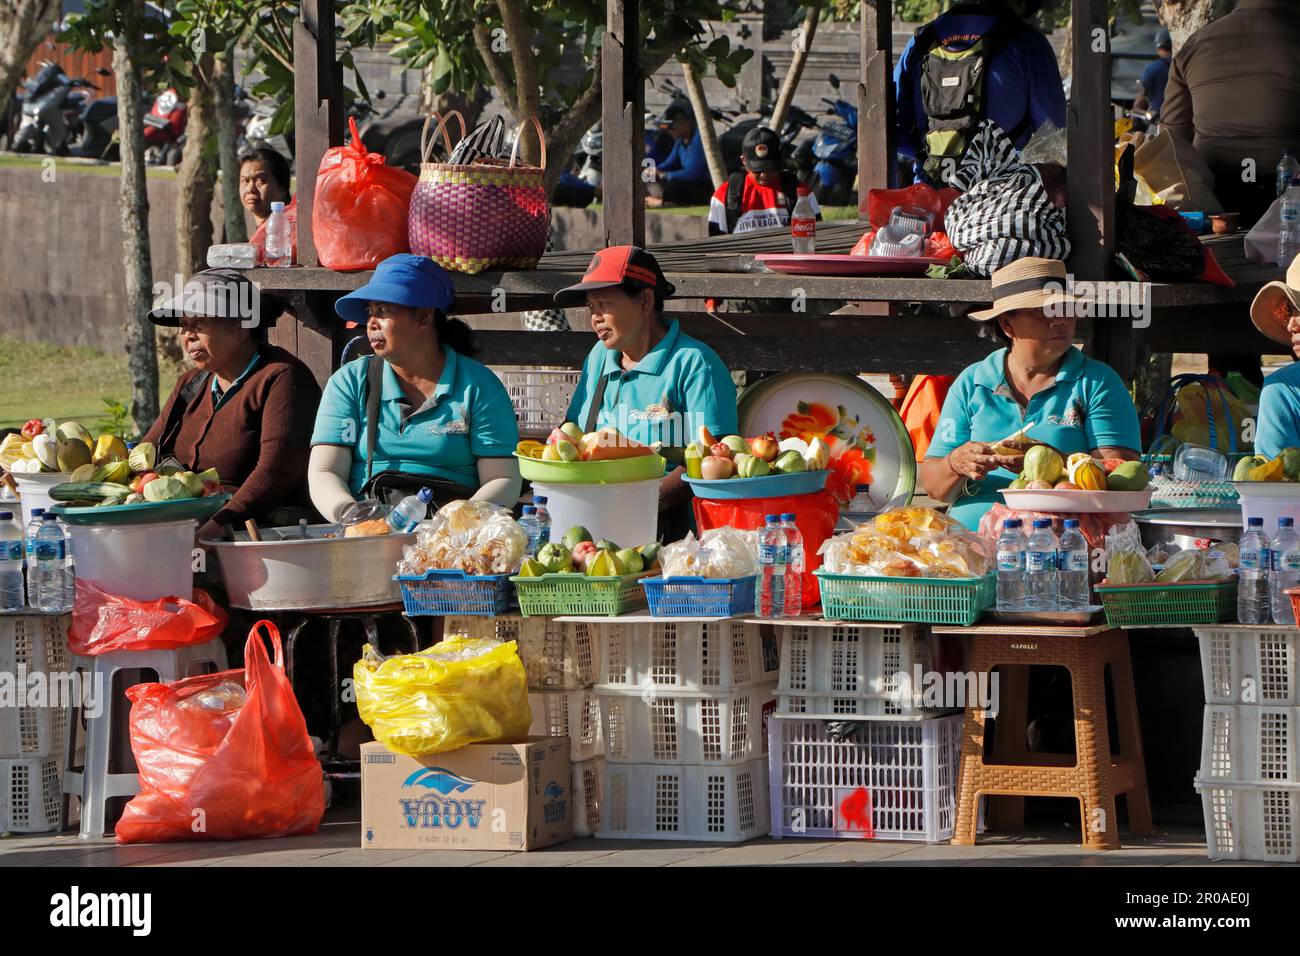 Tabanan, Bali, Indonesia - September 3, 2019: Indonesian woman selling produce in a traditional open market on the streets of the popular tourist area Stock Photo